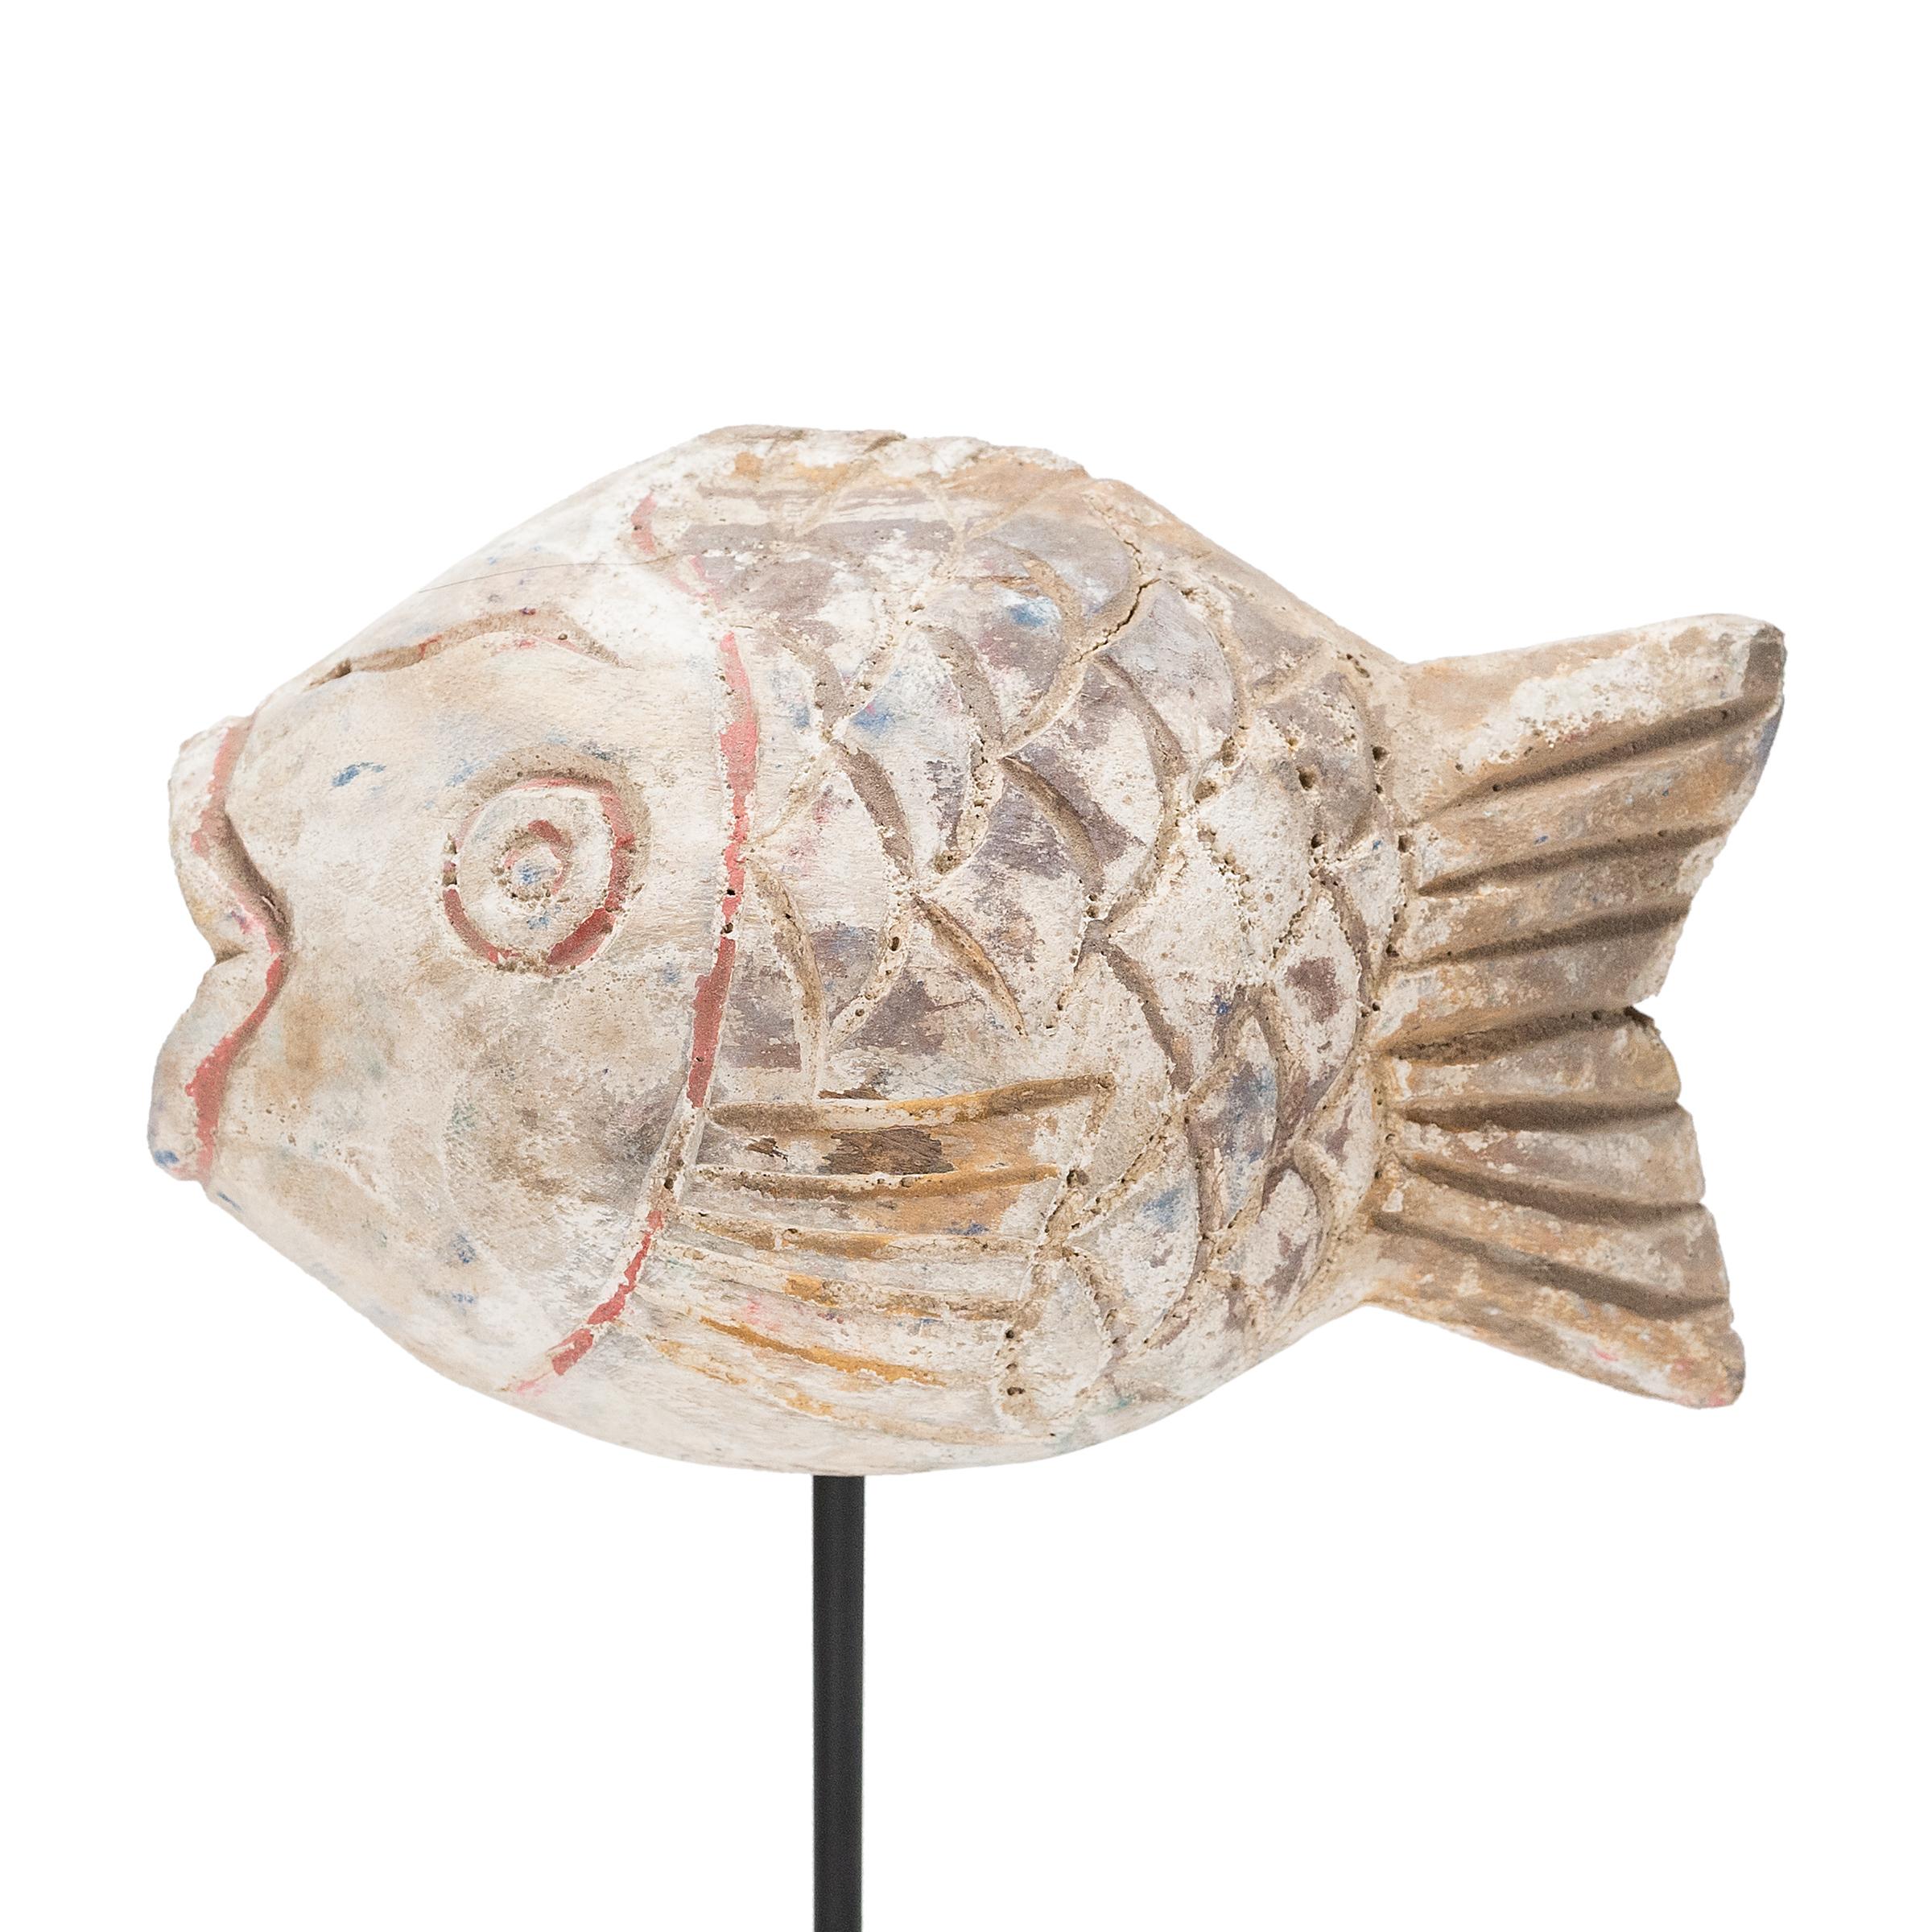 Hand-crafted from reclaimed wood, this artist-made koi is a traditional symbol of harmony and wealth. For Buddhists, such a fish represents a freedom from all restraints. The scales and fins on the squat, rounded body are highlighted with brown,